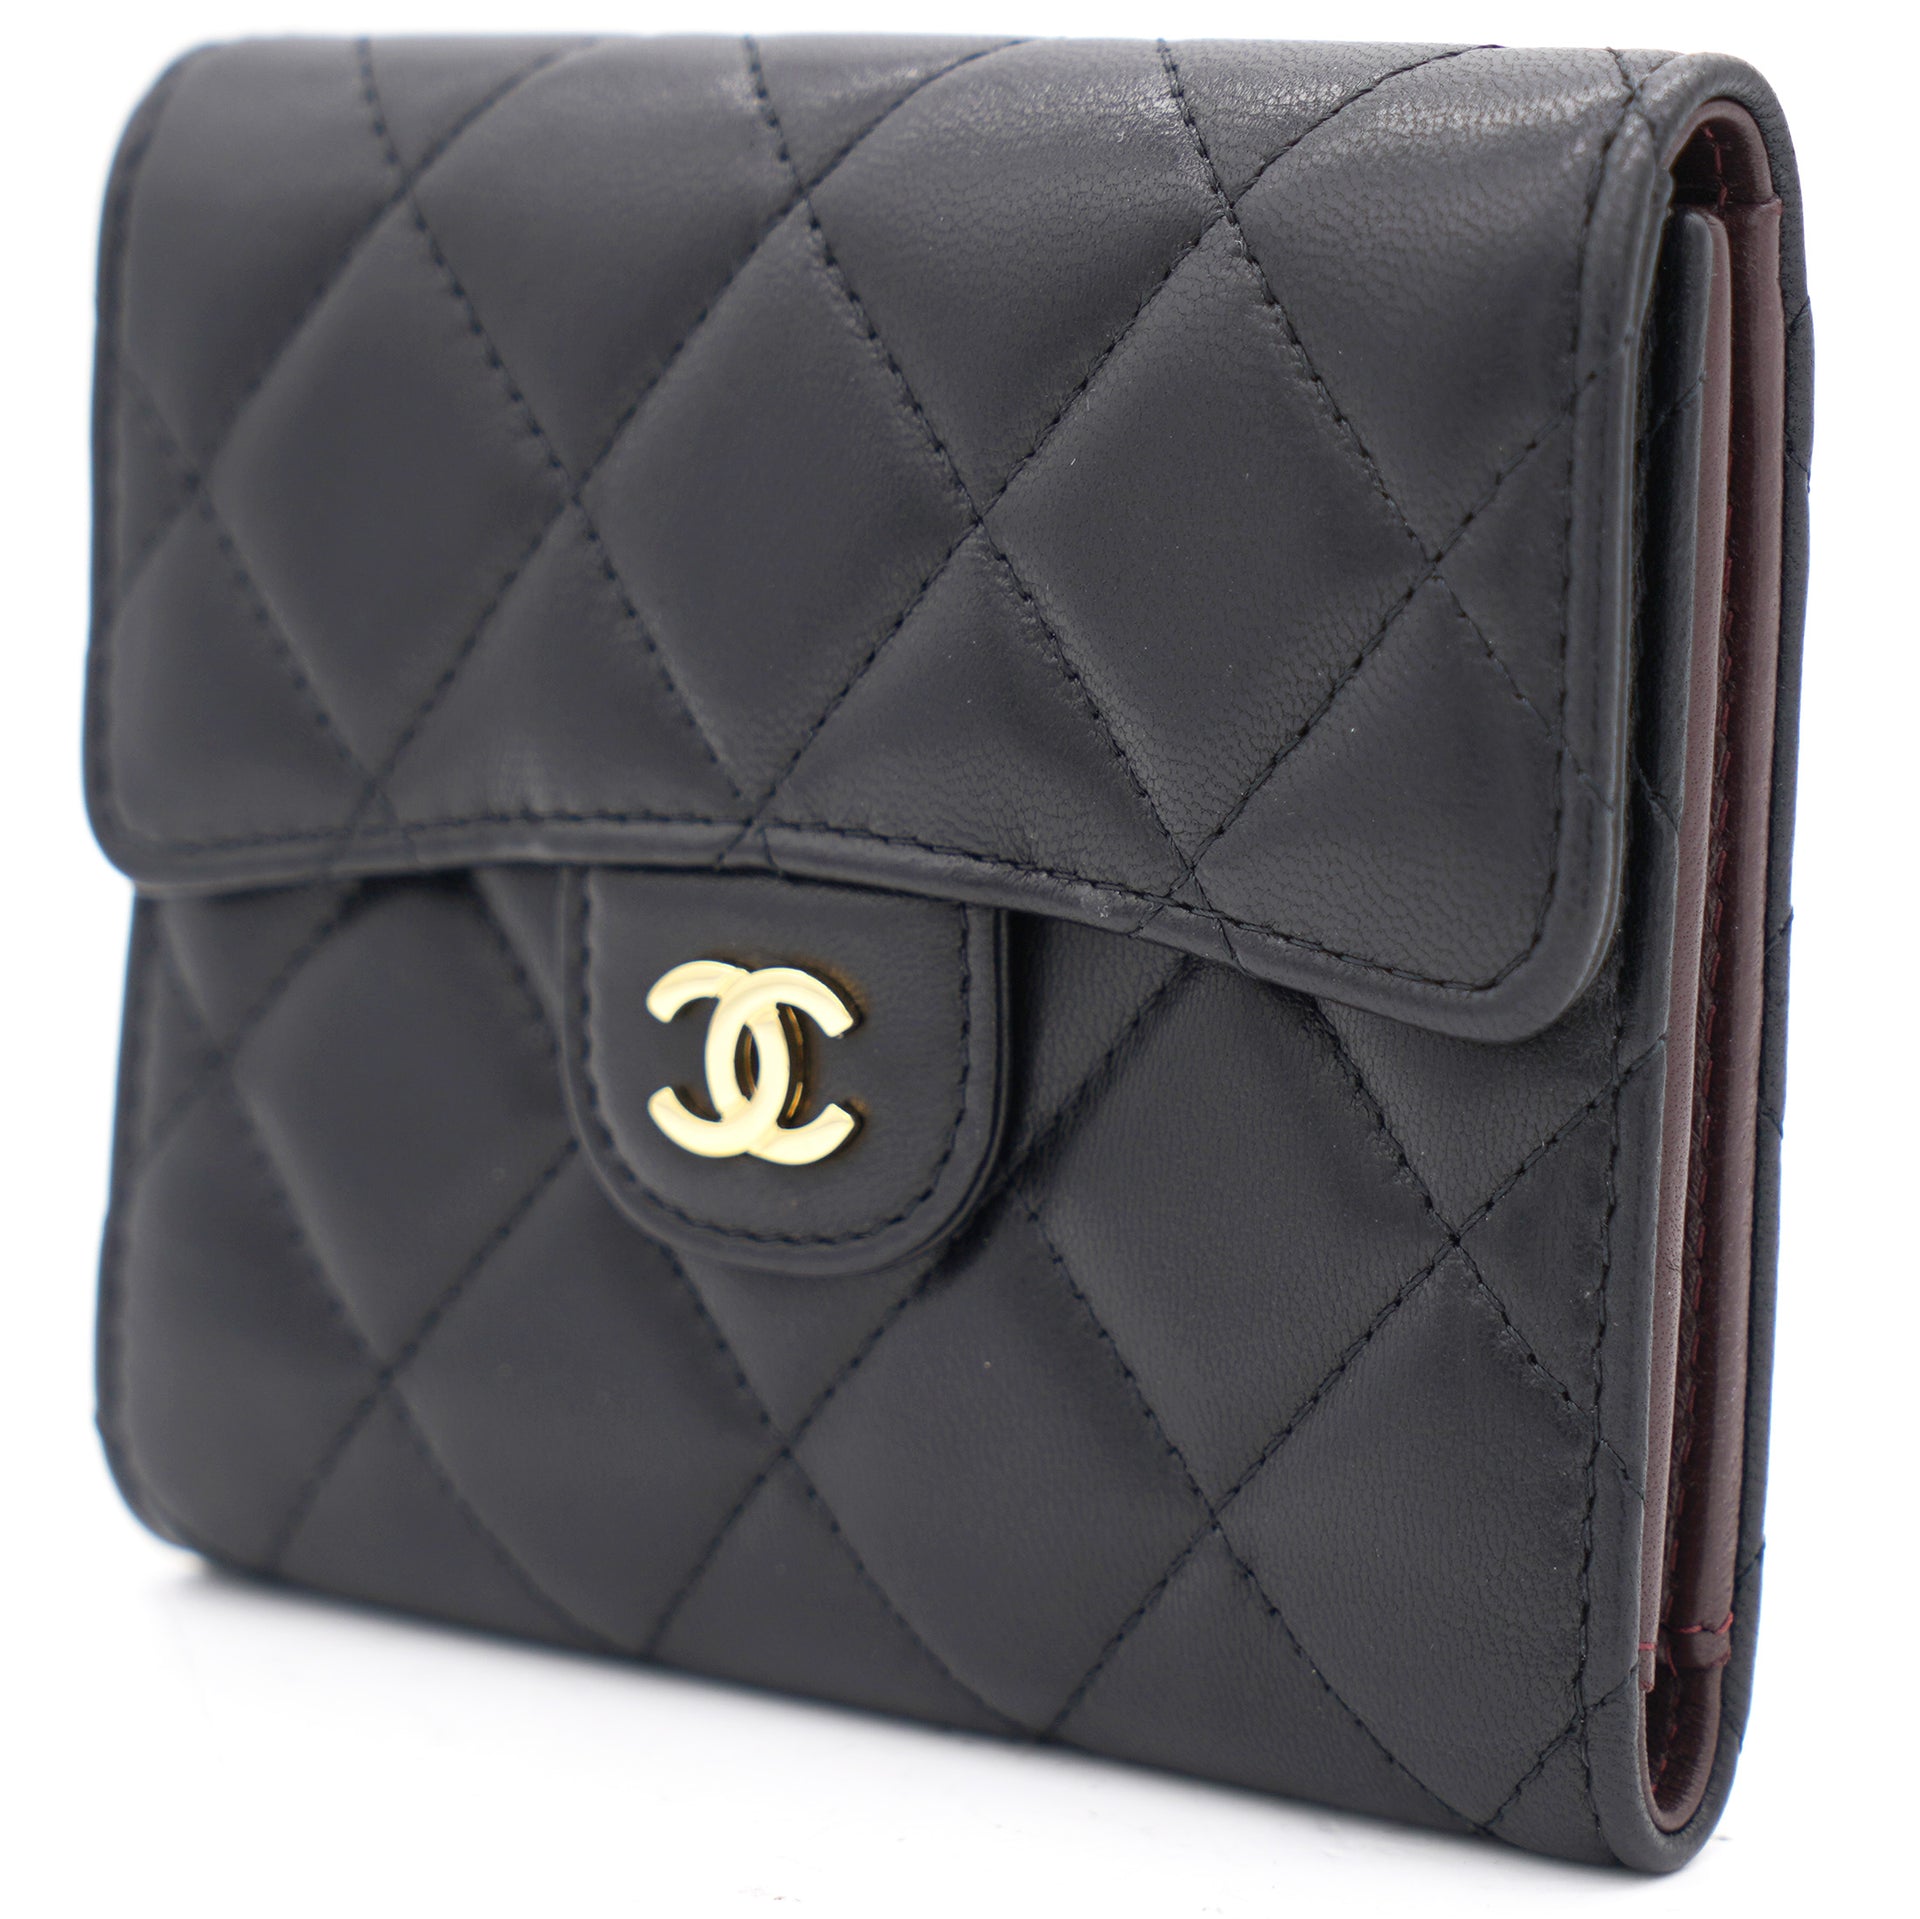 Black Quilted Leather CC Compact Wallet